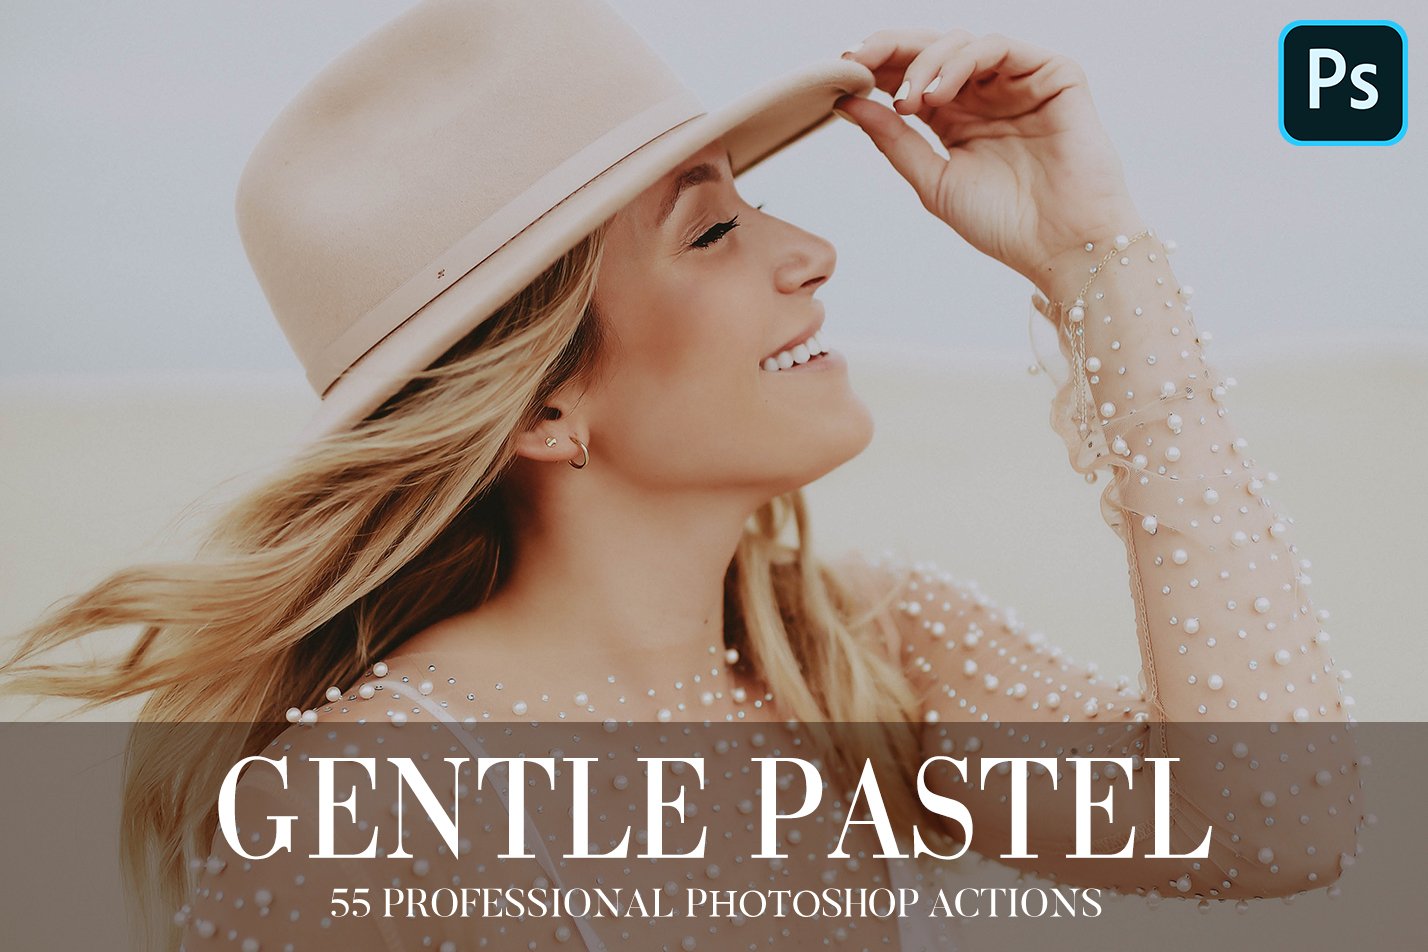 Photoshop Actions - Gentle Pastelcover image.